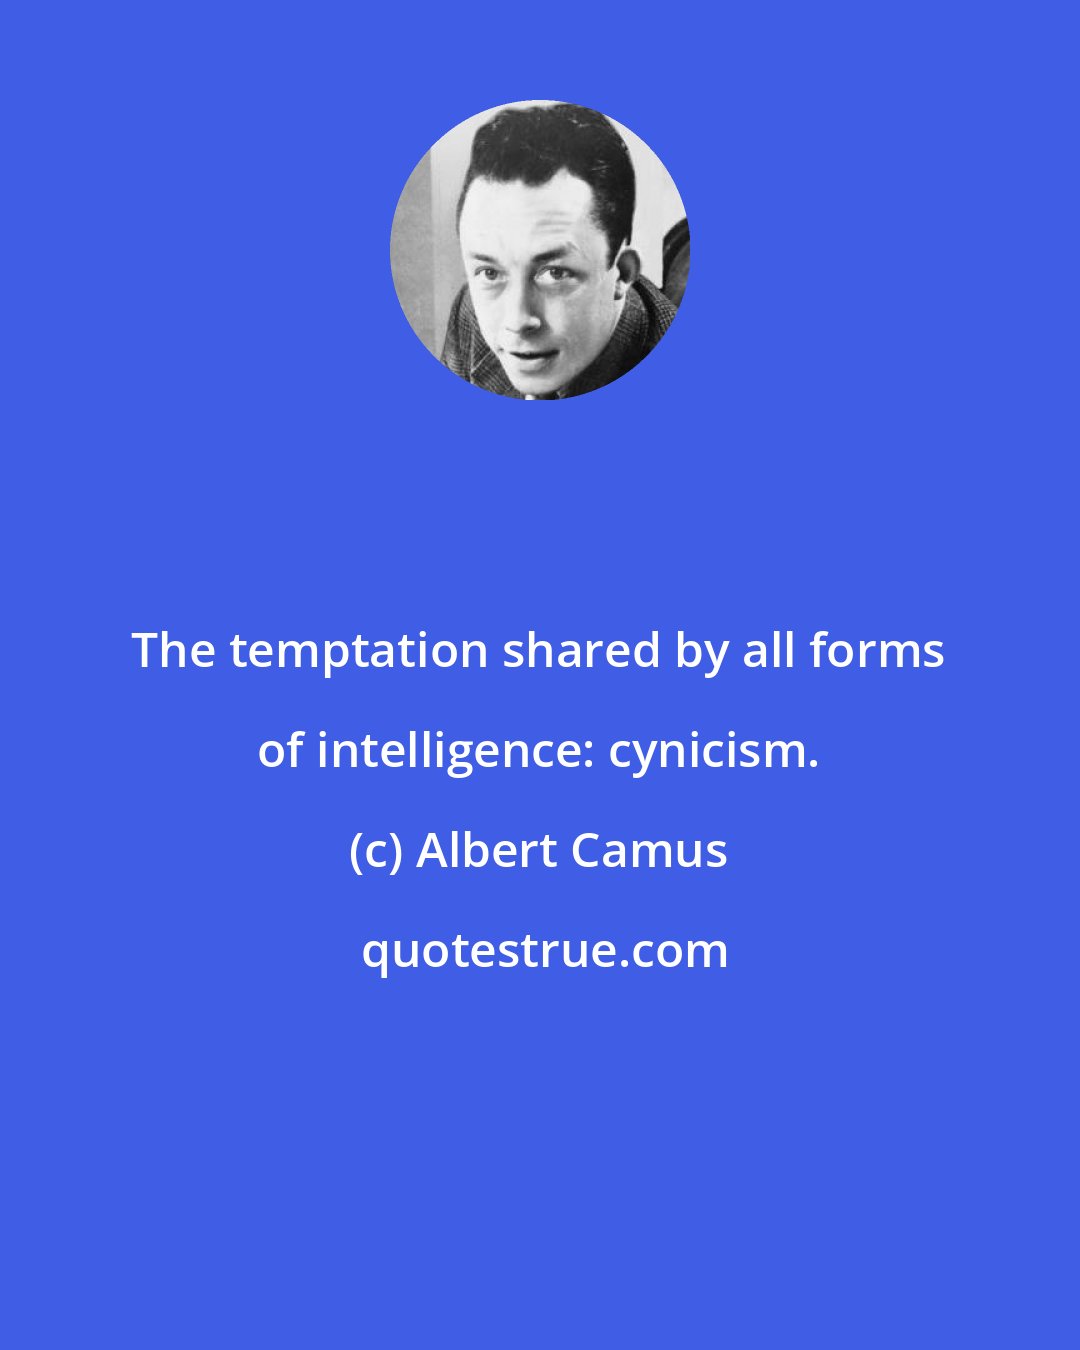 Albert Camus: The temptation shared by all forms of intelligence: cynicism.